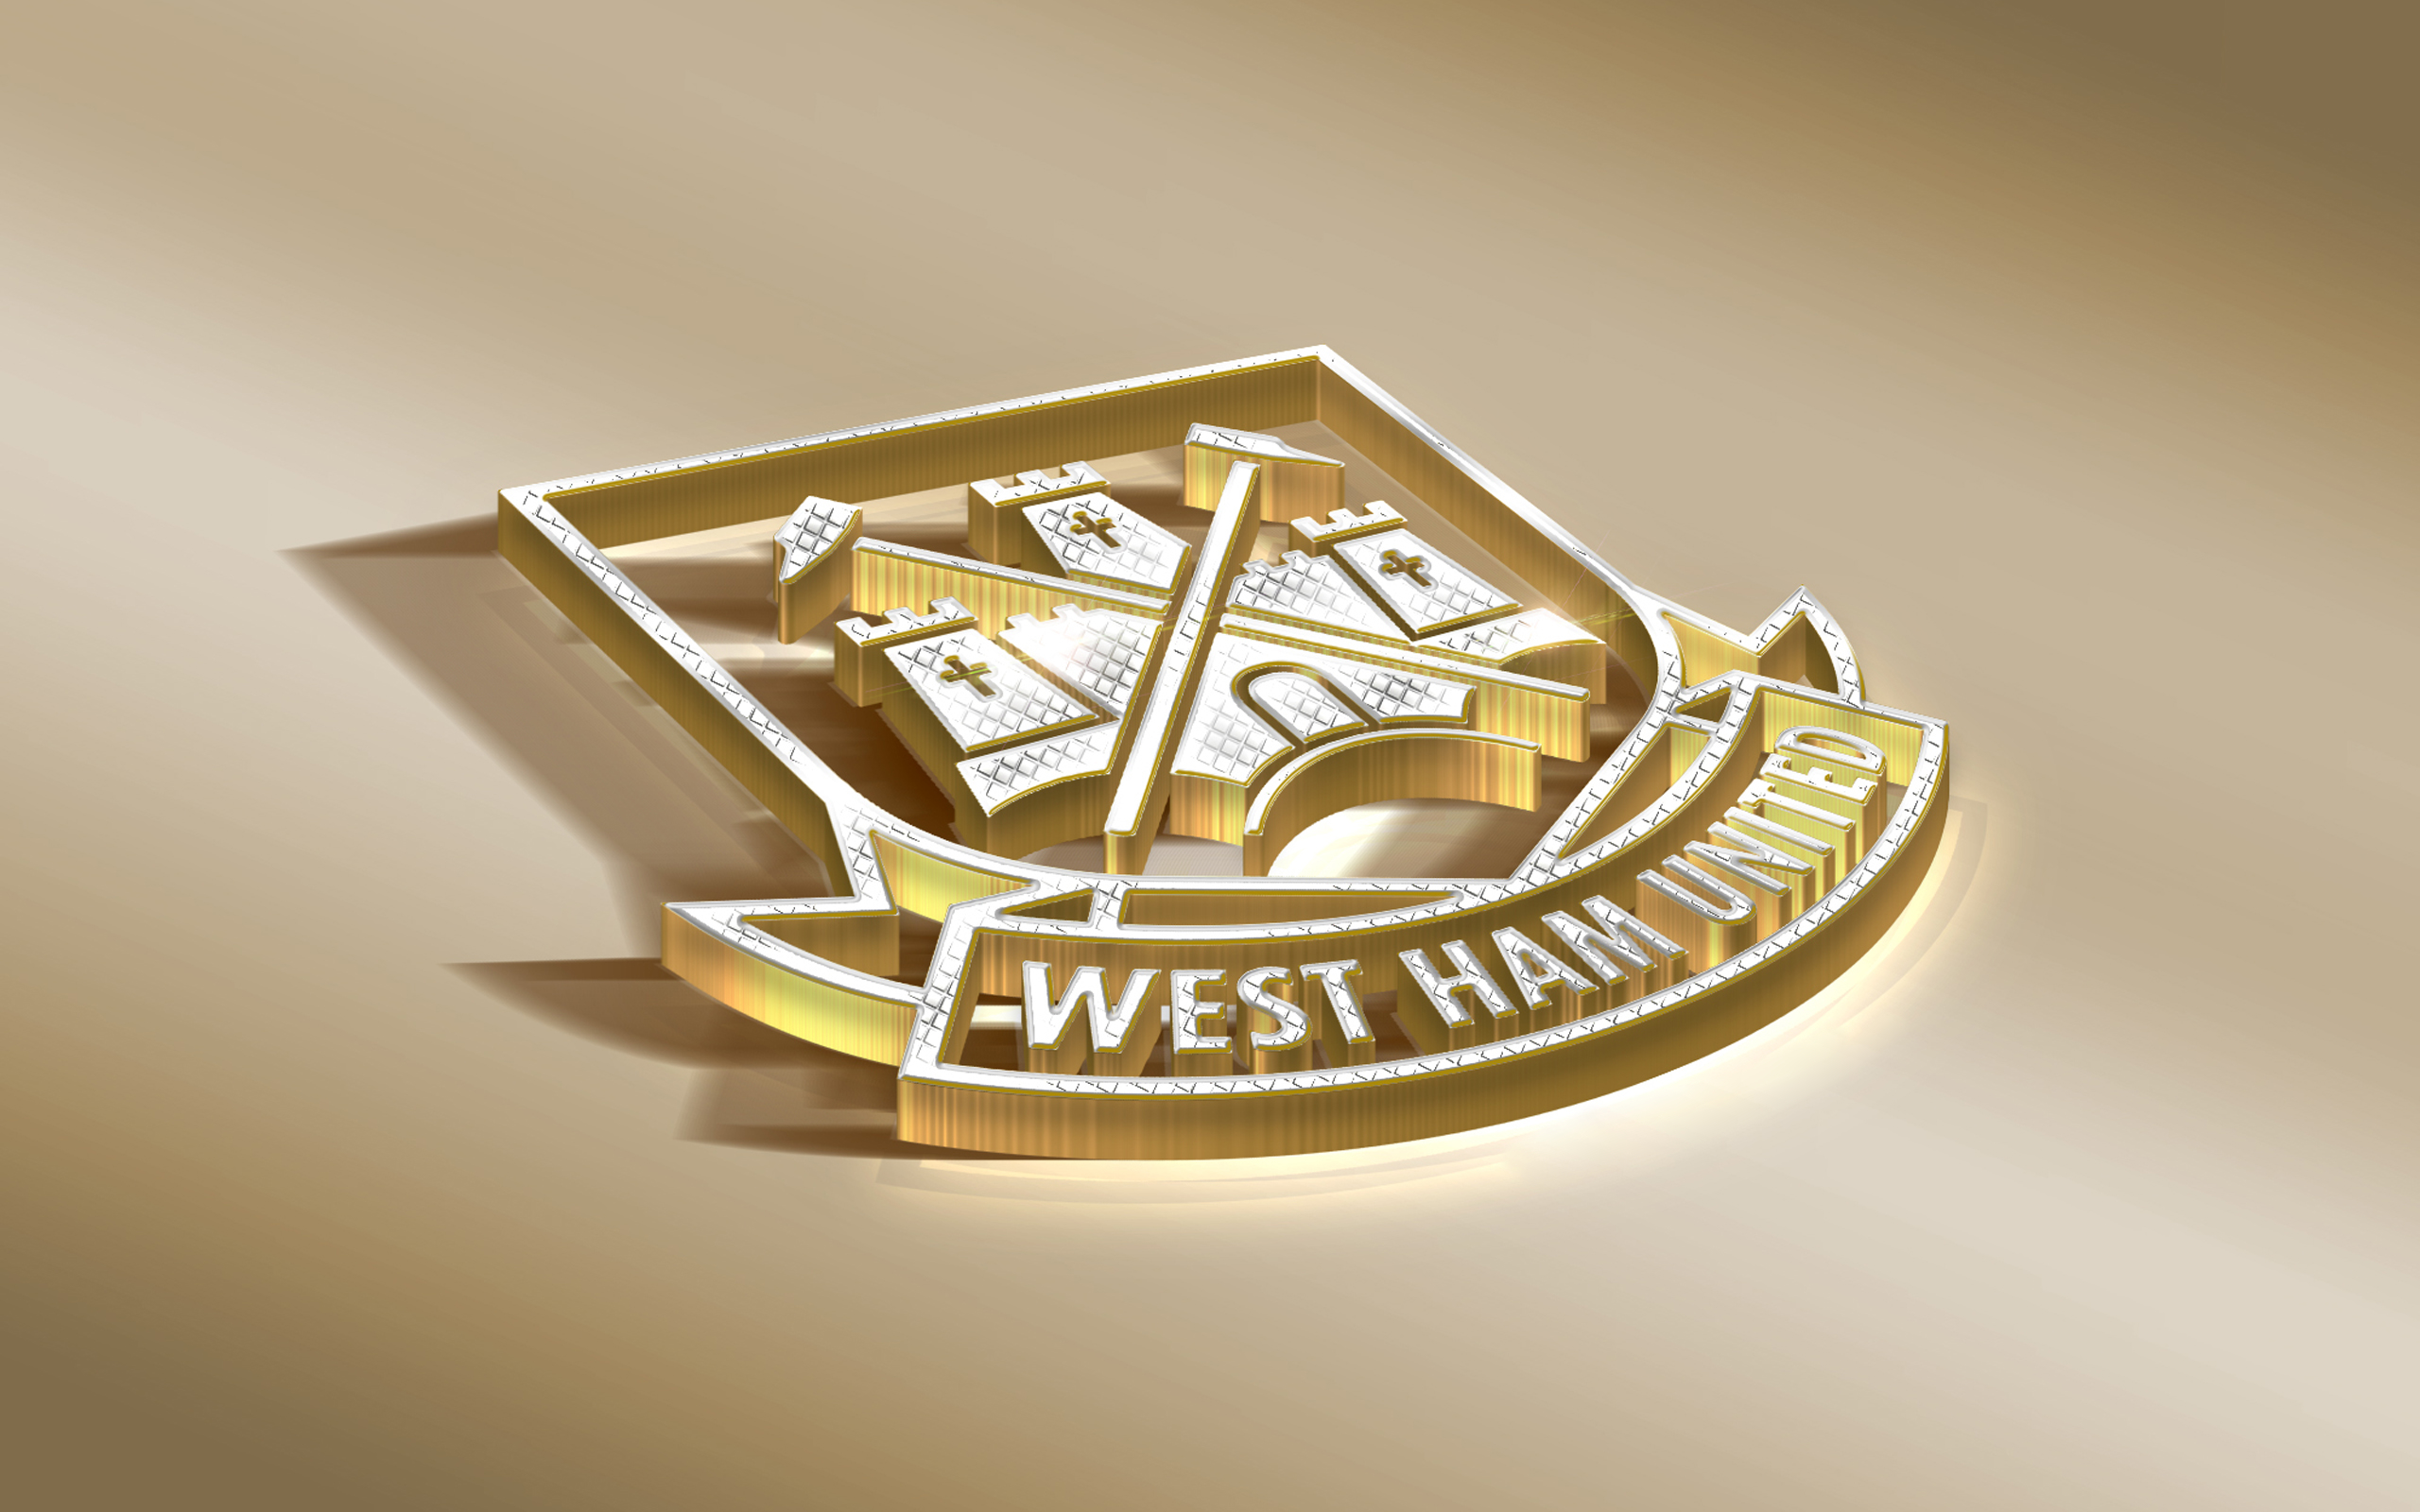 West ham united fc hd wallpapers backgrounds